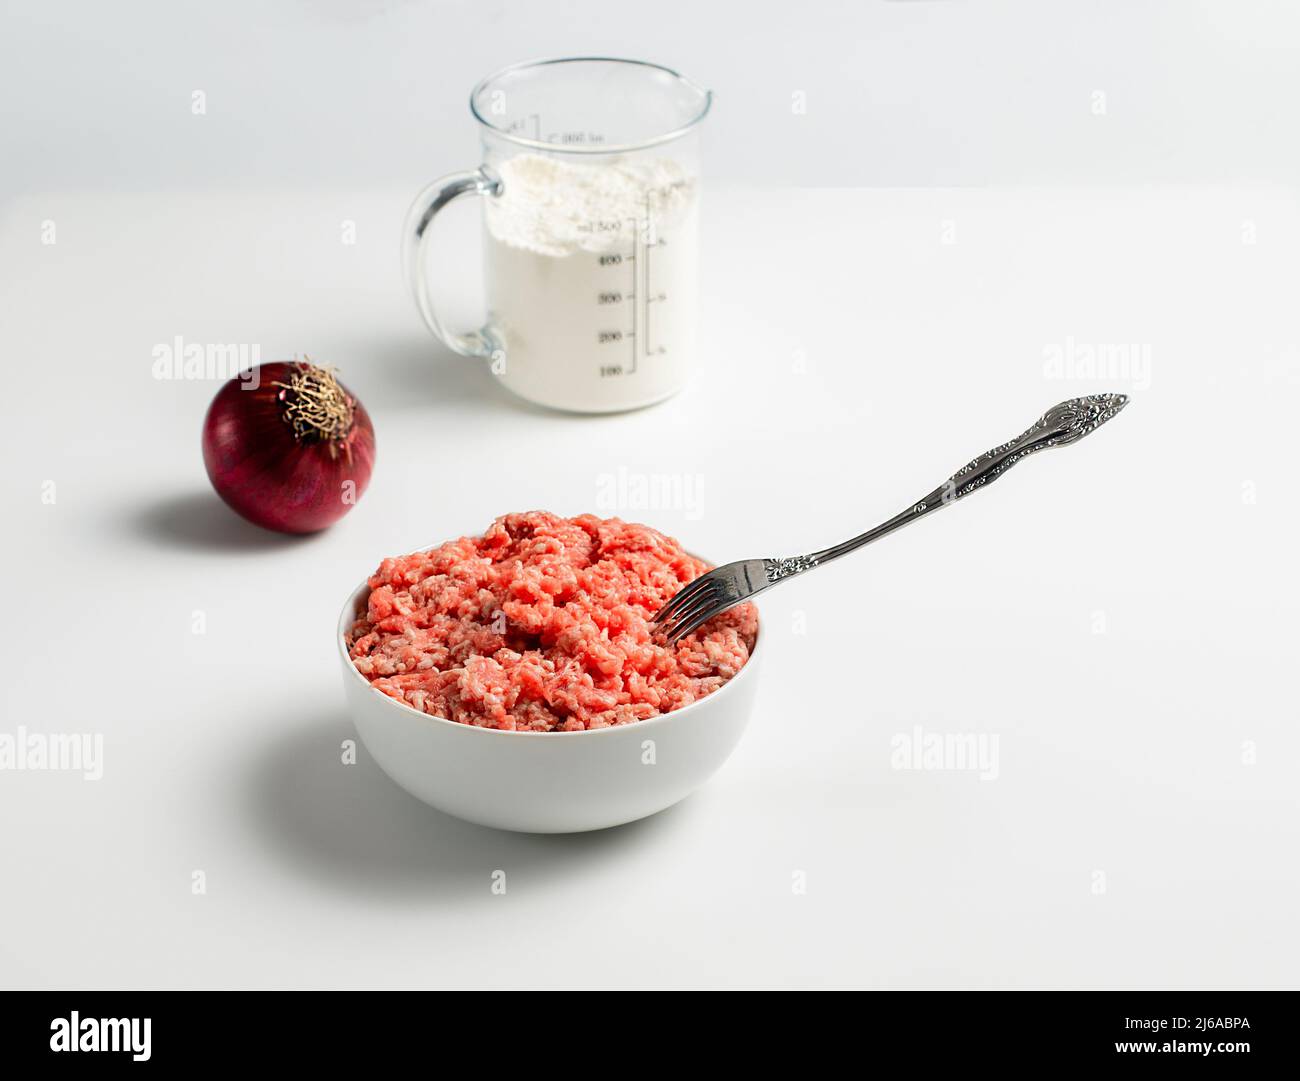 Plate with fresh ground beef and fork, red onion, measuring cup with flour on a white background, space for text, stock photo Stock Photo